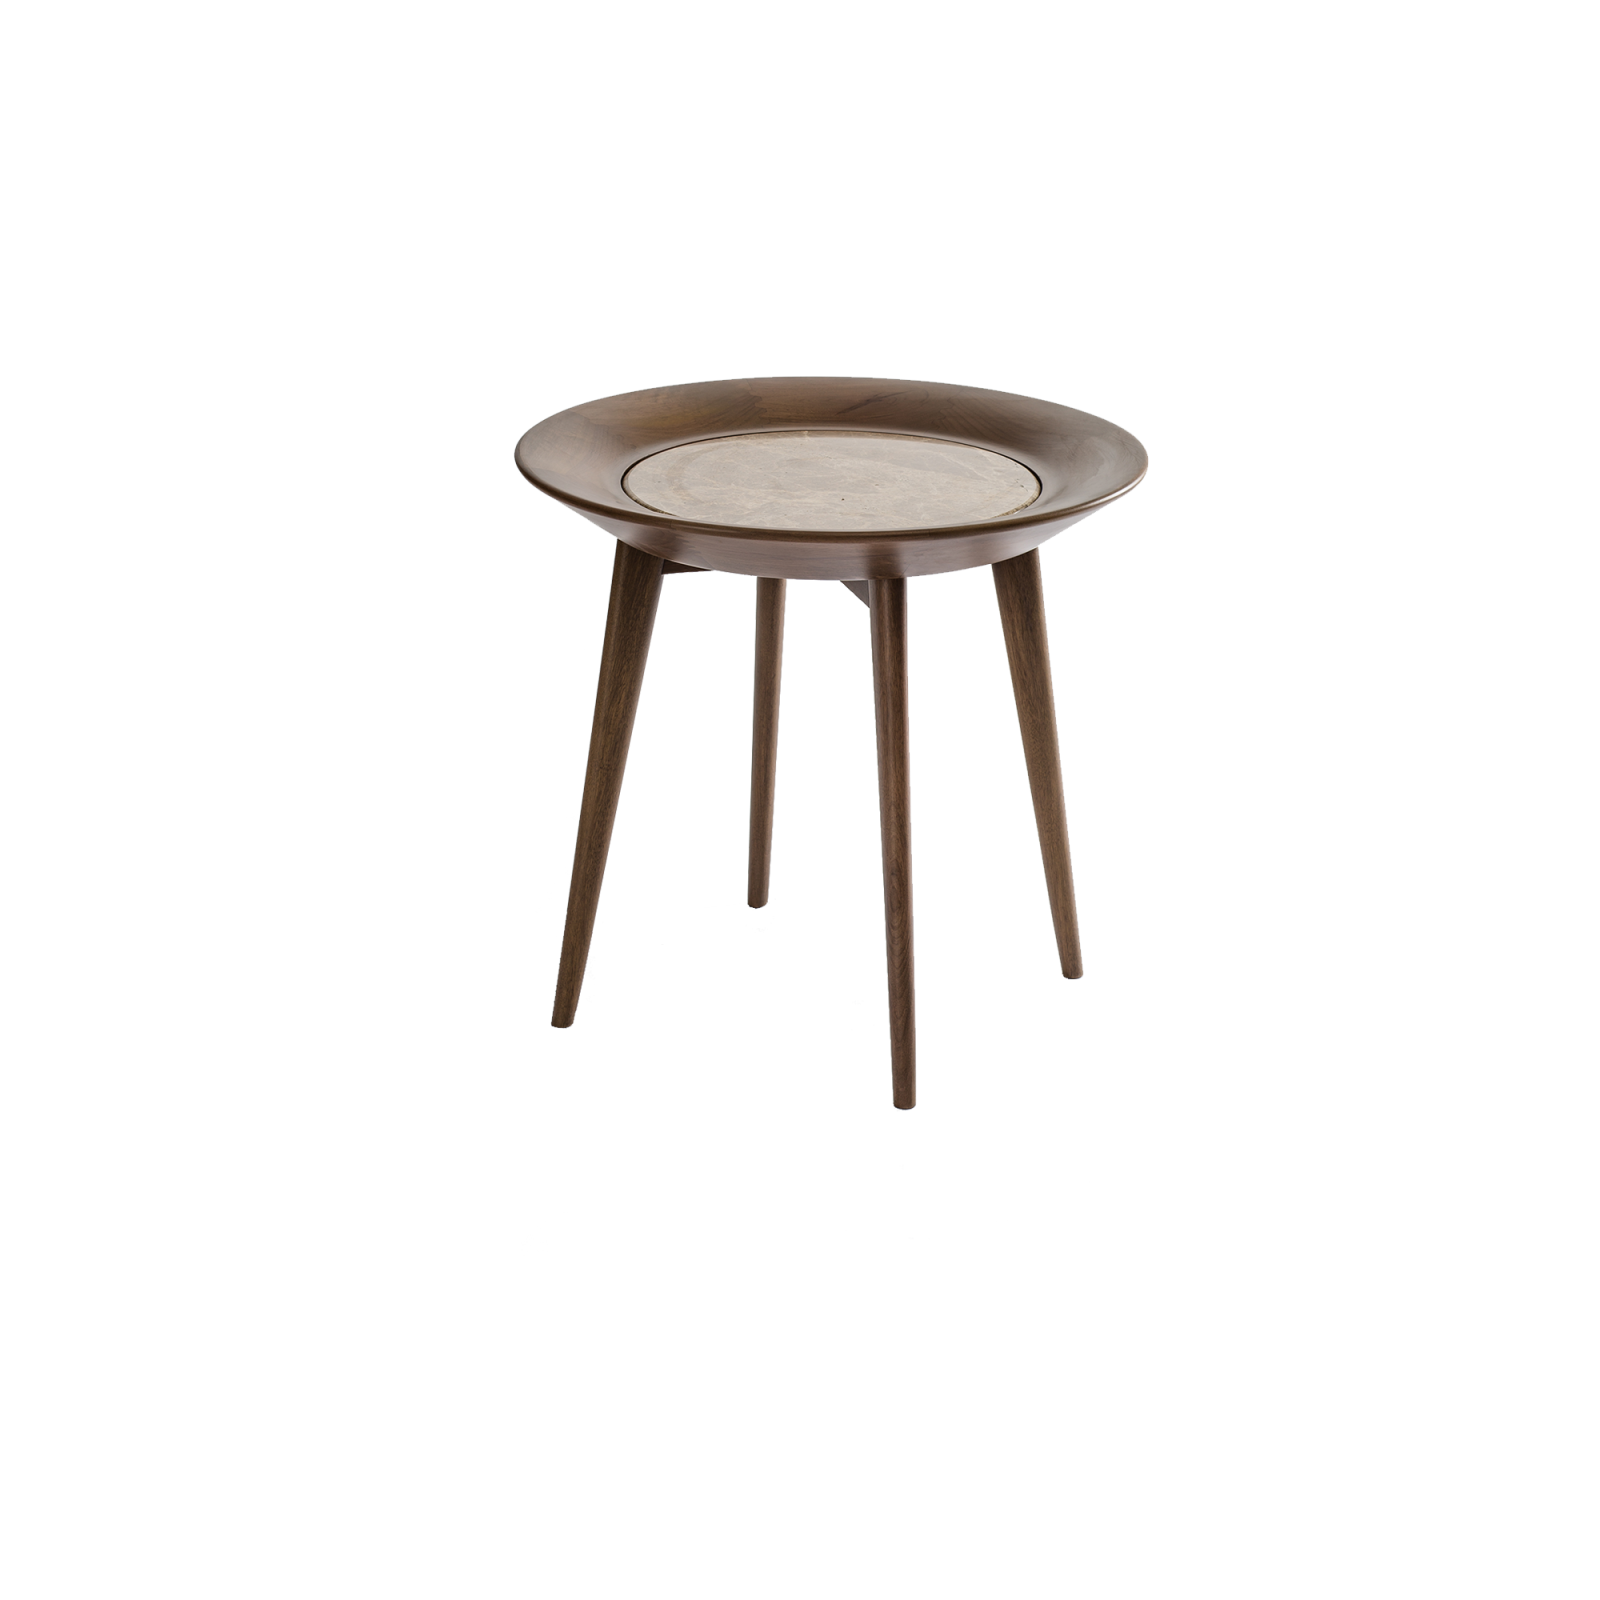 Iris, a side table of ENNE designed by MARCONATA & ZAPPA.